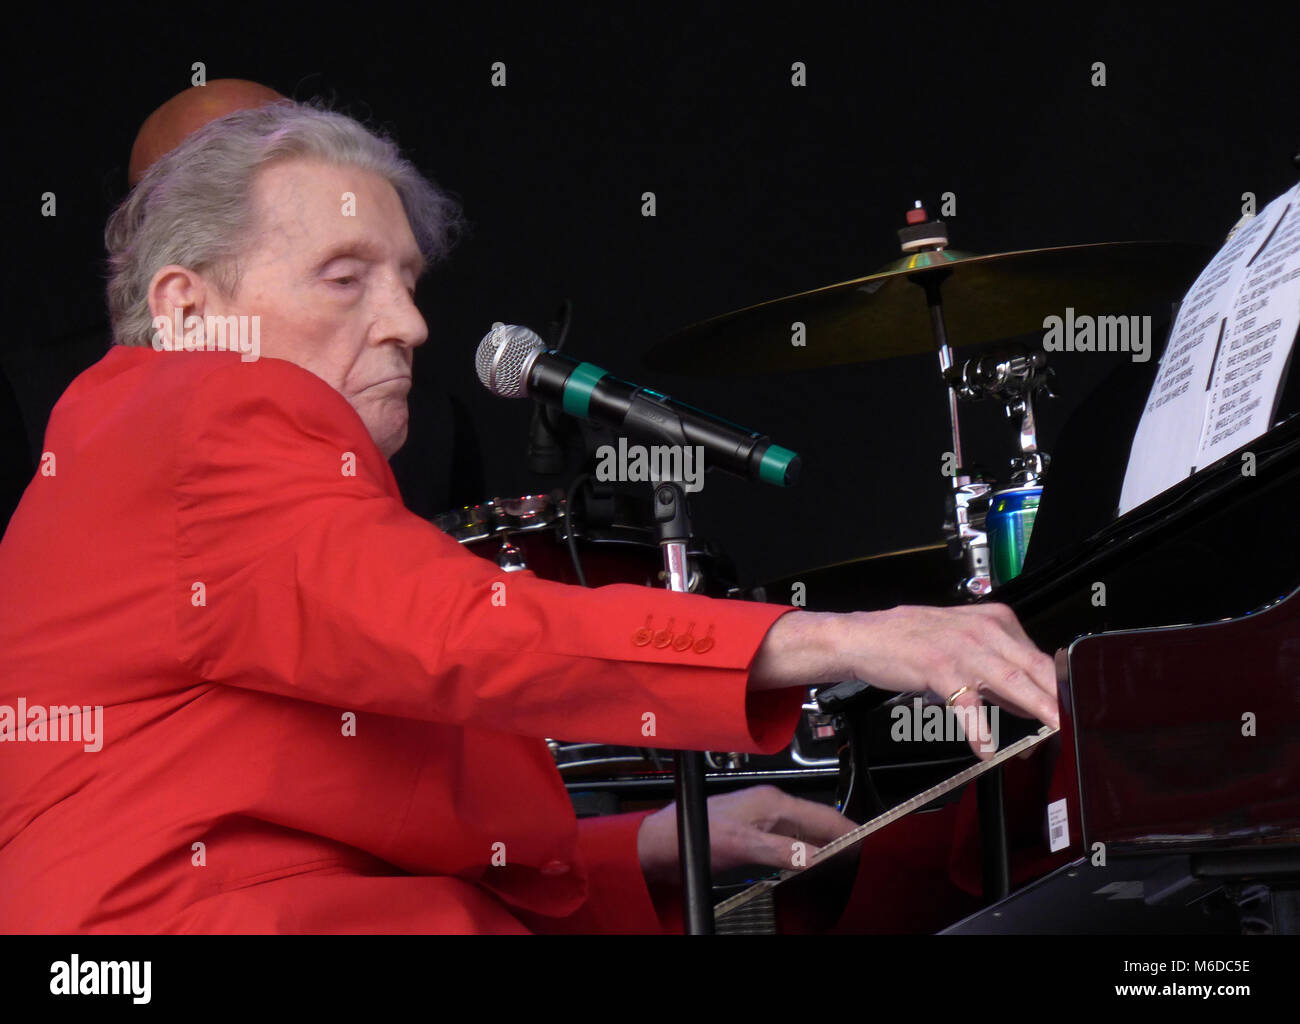 Plant City, Florida, USA. 2nd March, 2018. Legendary singer, songwriter, and pianist Jerry Lee Lewis, performs on March 2, 2018 at the Florida Strawberry Festival in Plant City, Florida. A pioneer of rock and roll and rockabilly music, the 82 year-old Lewis is often known by his nickname, The Killer. (Paul Hennessy/Alamy) Credit: Paul Hennessy/Alamy Live News Stock Photo